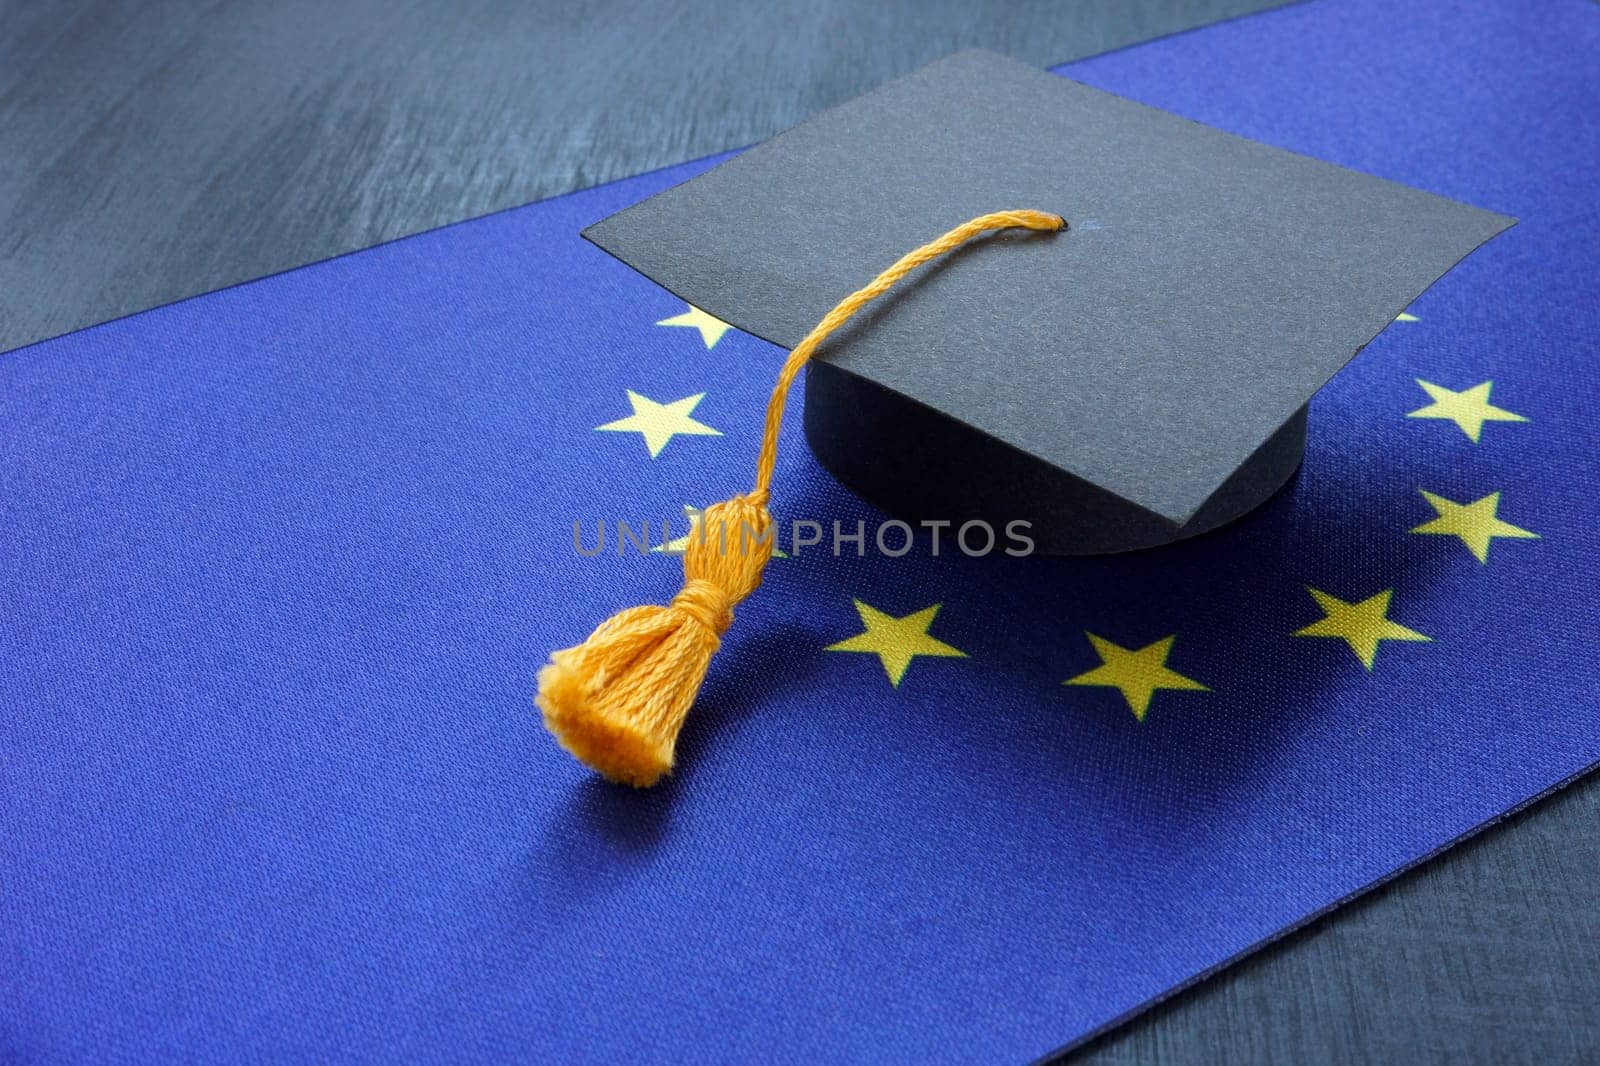 The flag of the European Union and the graduation hat as symbol of education.